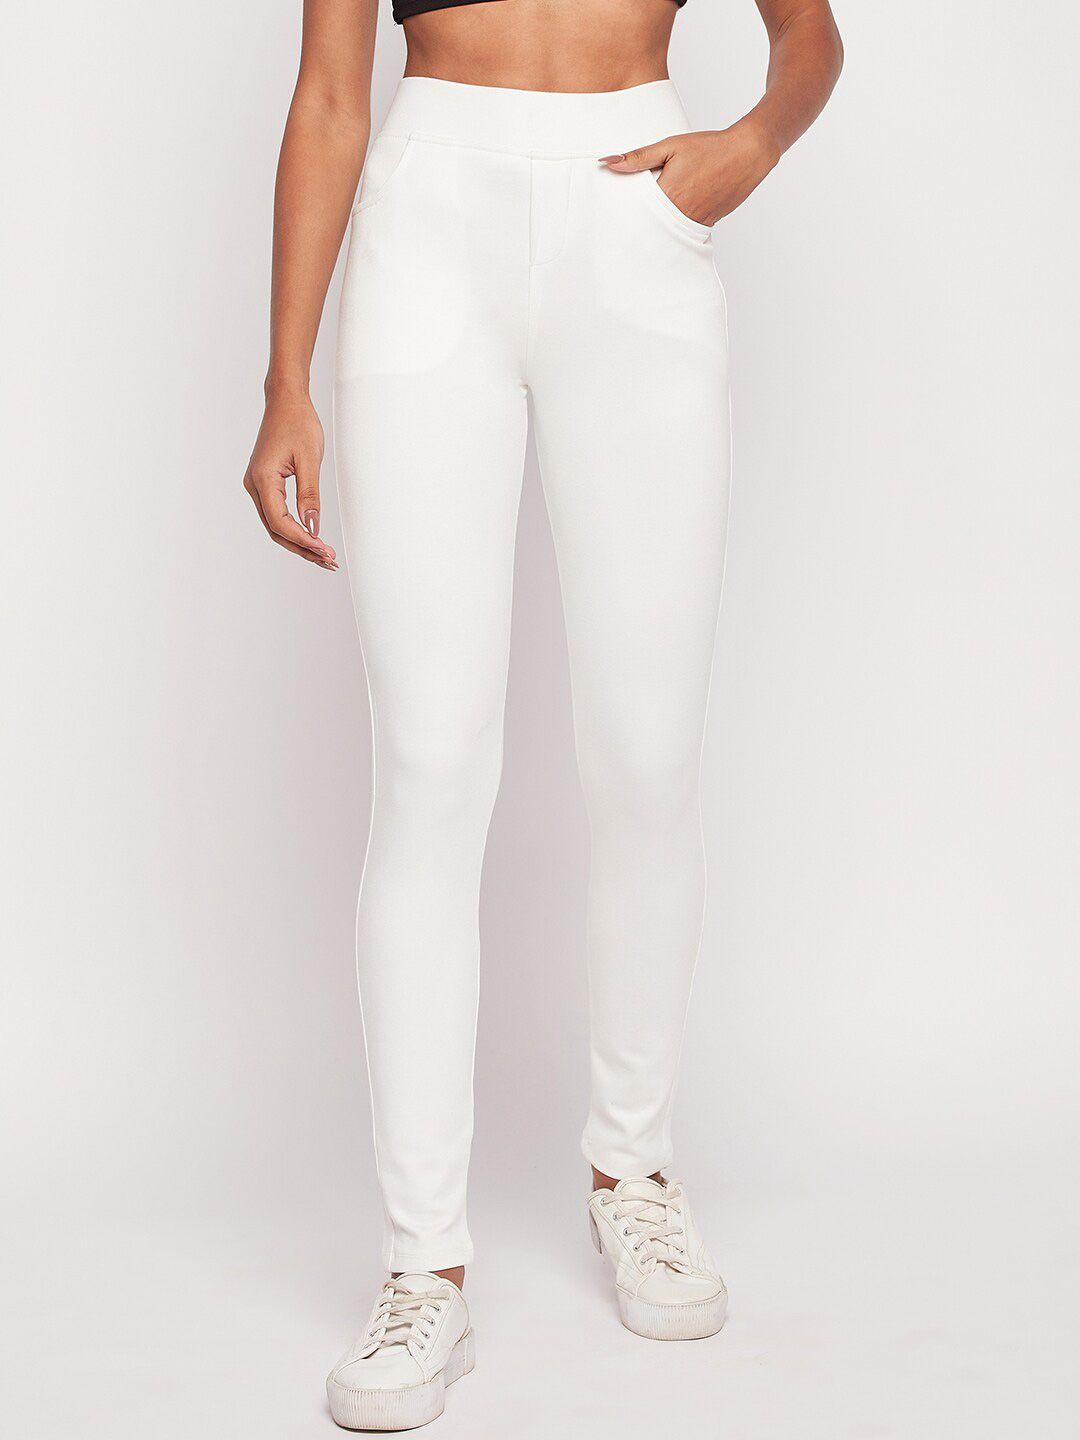 tulip-21-women-slim-fit-stretchable-jeggings